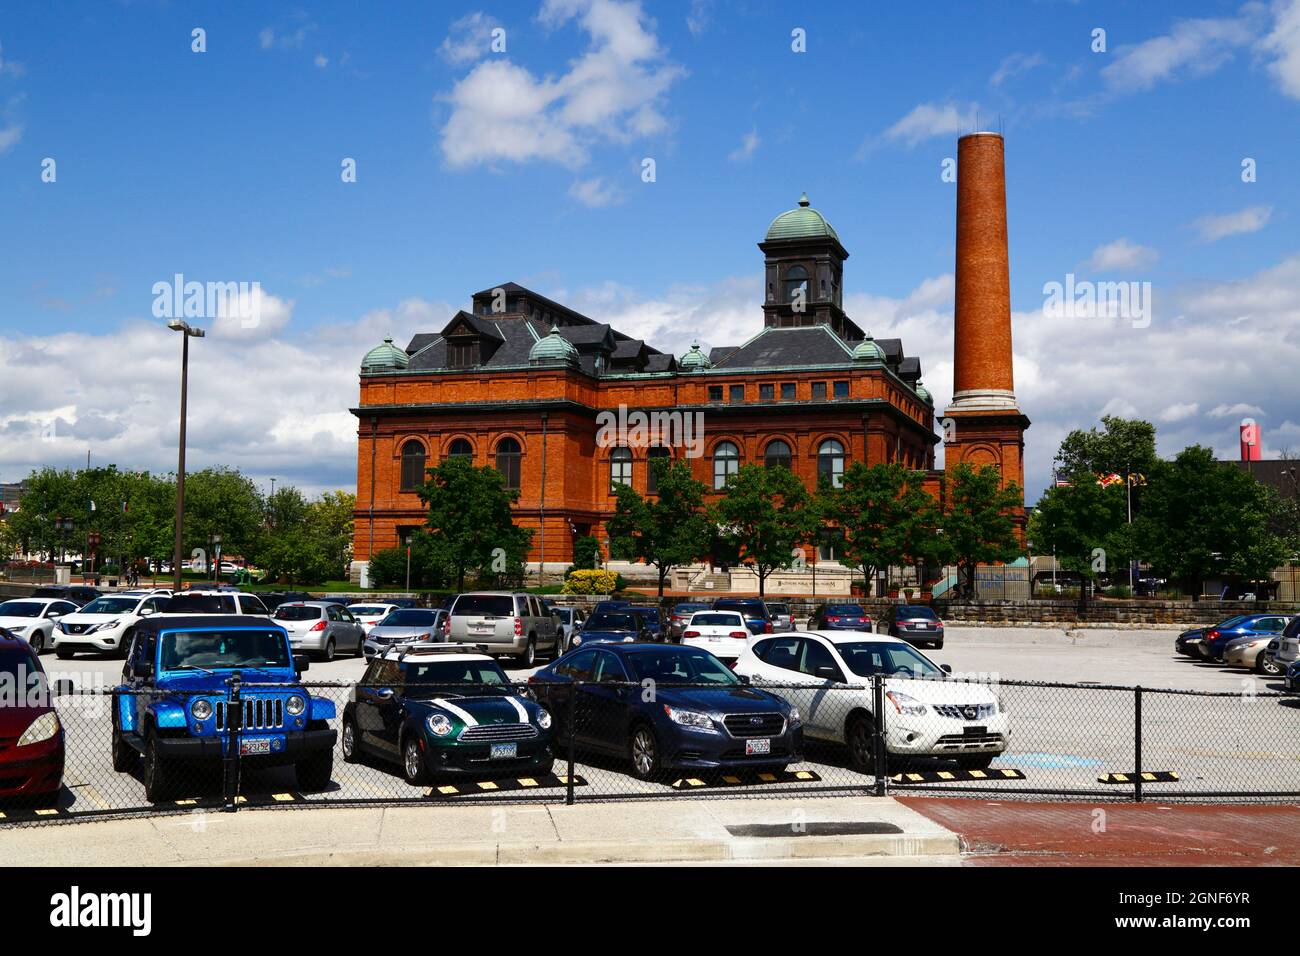 Eastern Avenue Sewage Pumping Station and car park on Pier 5, Harbor East / Inner Harbor, Baltimore, Maryland, USA Stock Photo